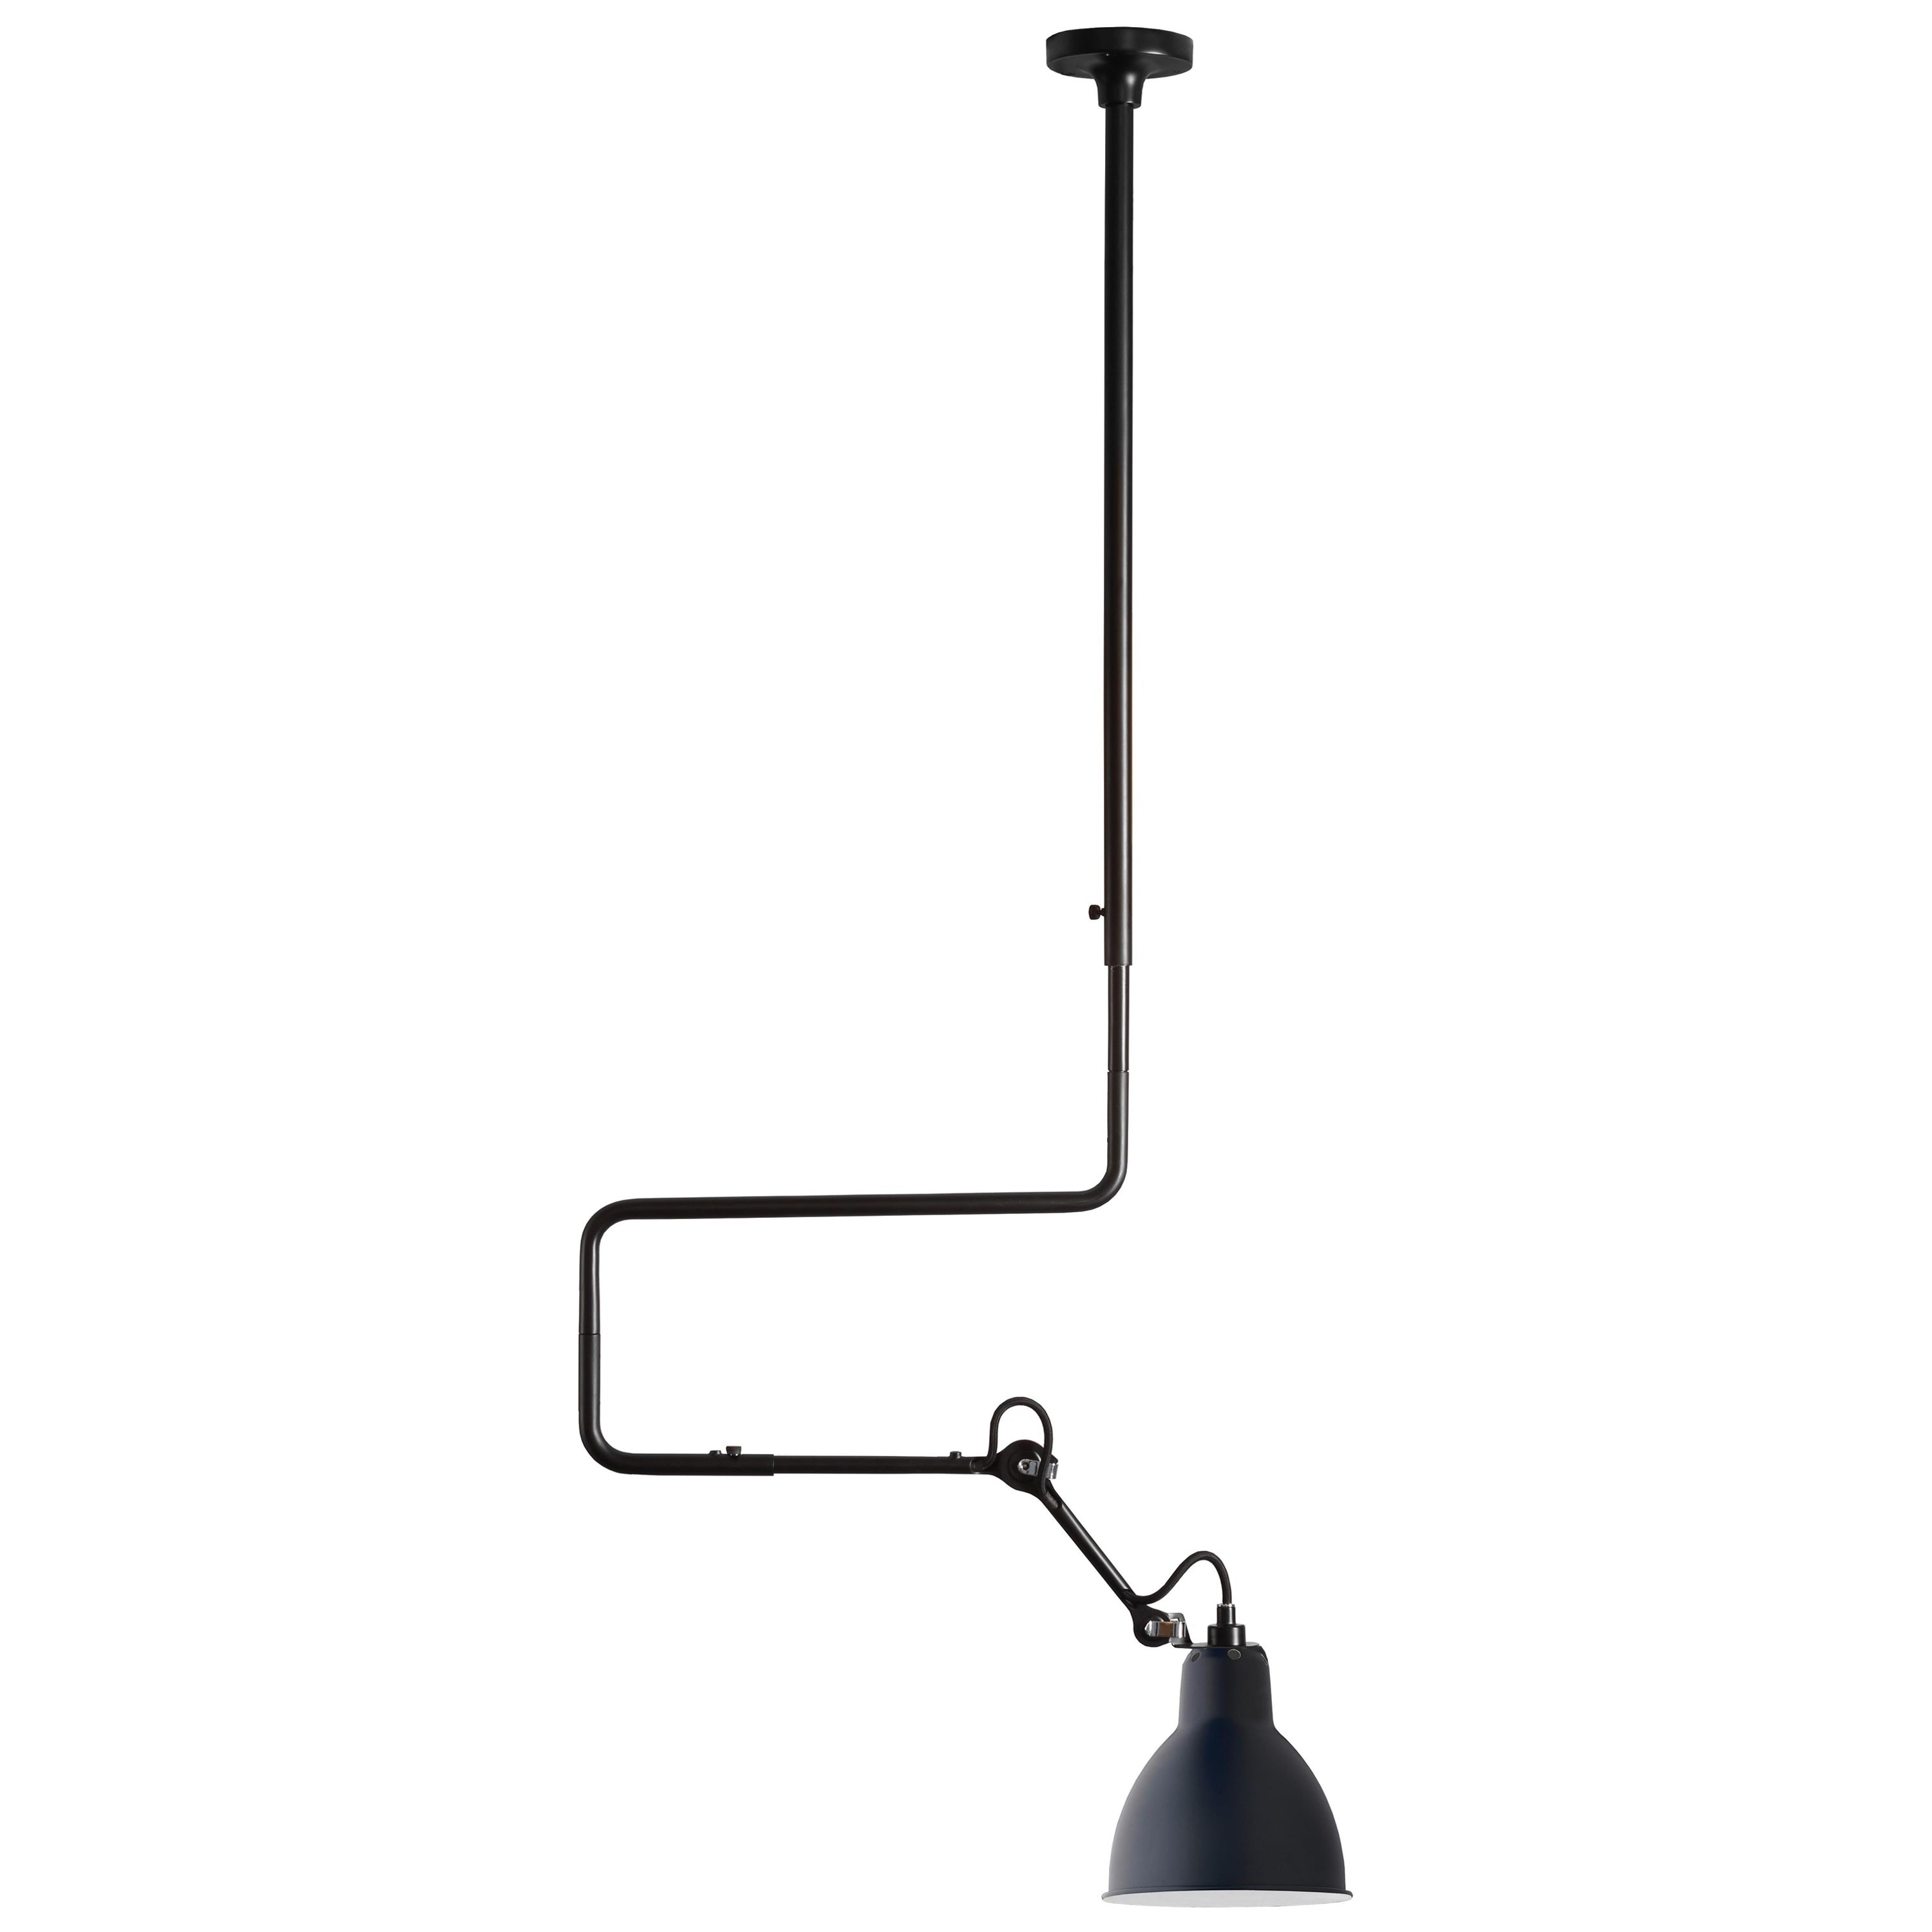 DCW Editions La Lampe Gras N°312 L Pendant Lamp in Black Arm and Blue Shade